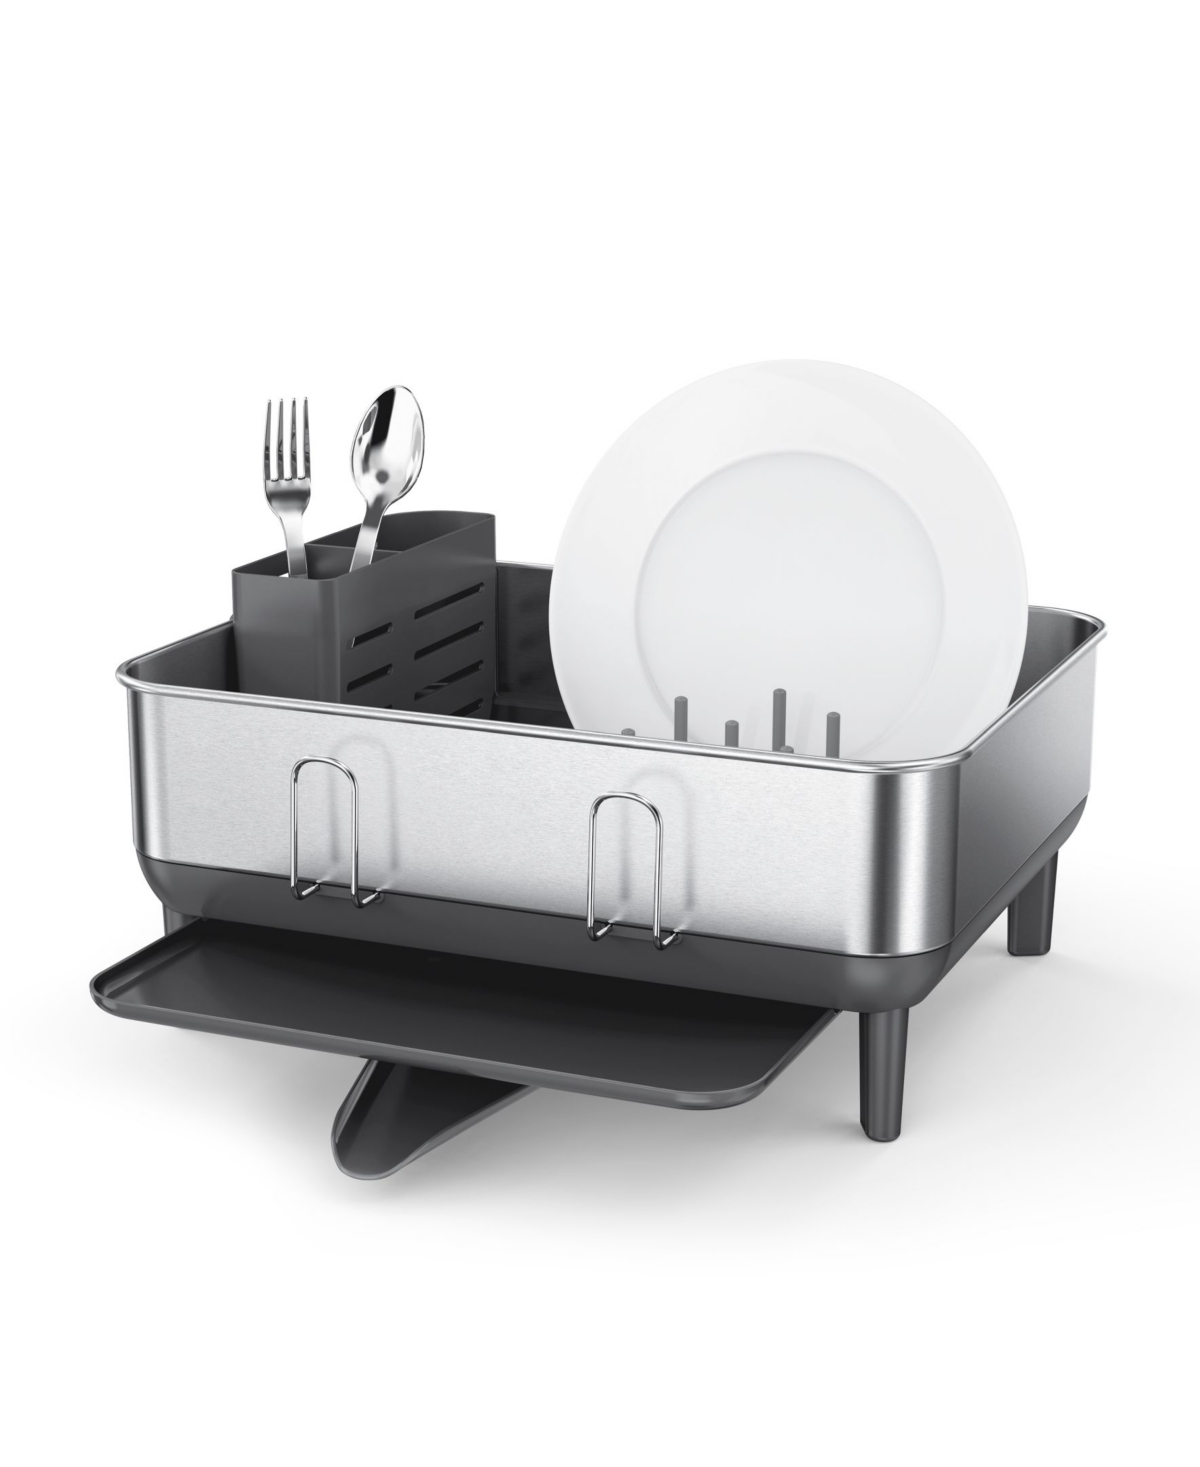 Compact Steel Frame Dish Drying Rack, Brushed Stainless Steel, White Plastic - Brushed Stainless Steel